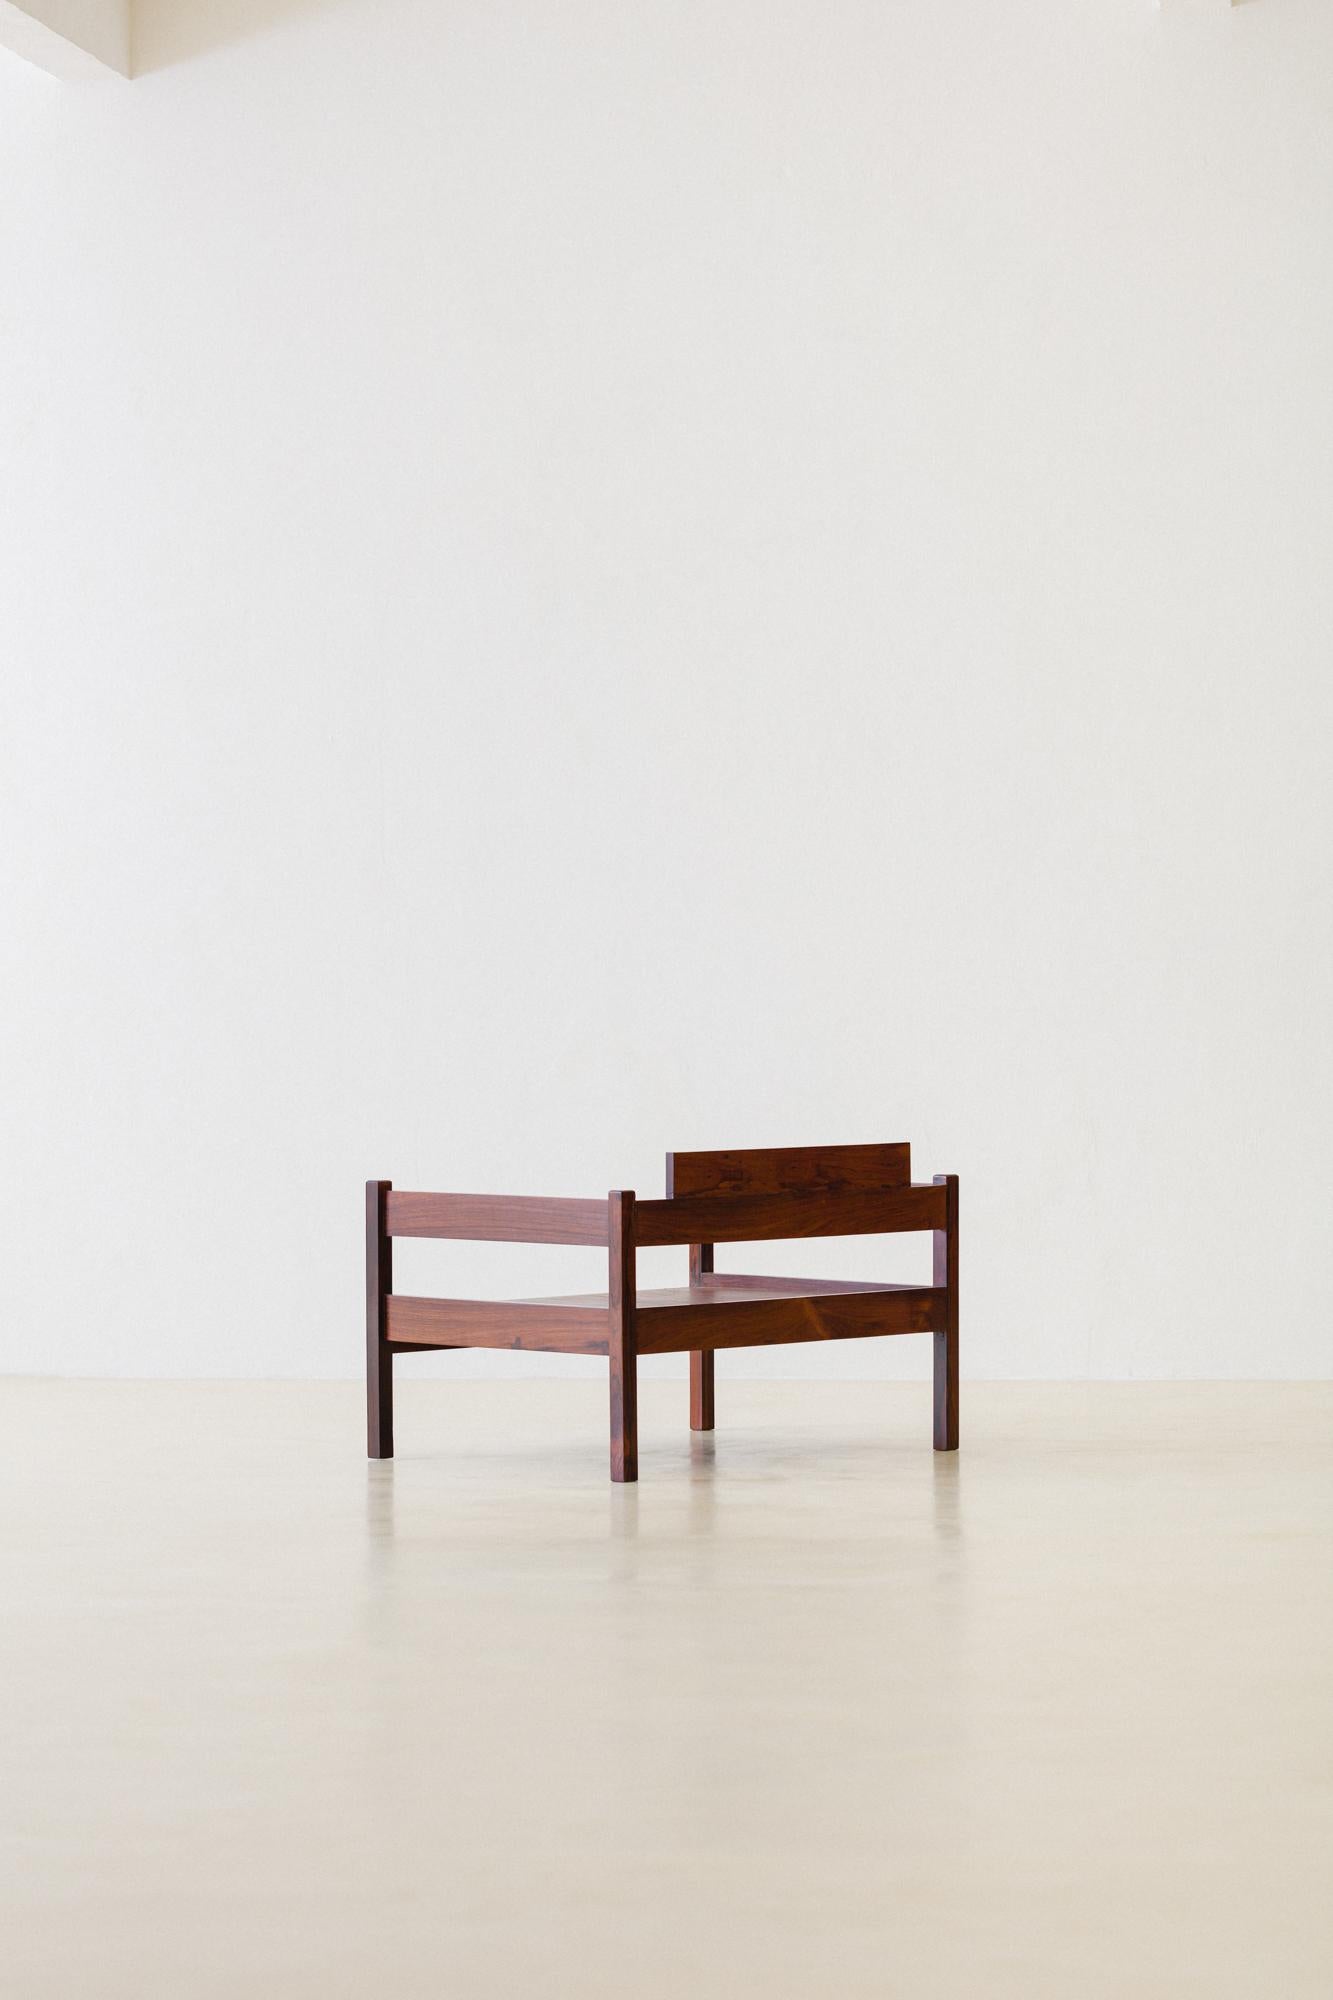 Pair of Brazilian Rosewood Armchairs with Ottomans by Celina Decorações, 1960s For Sale 2